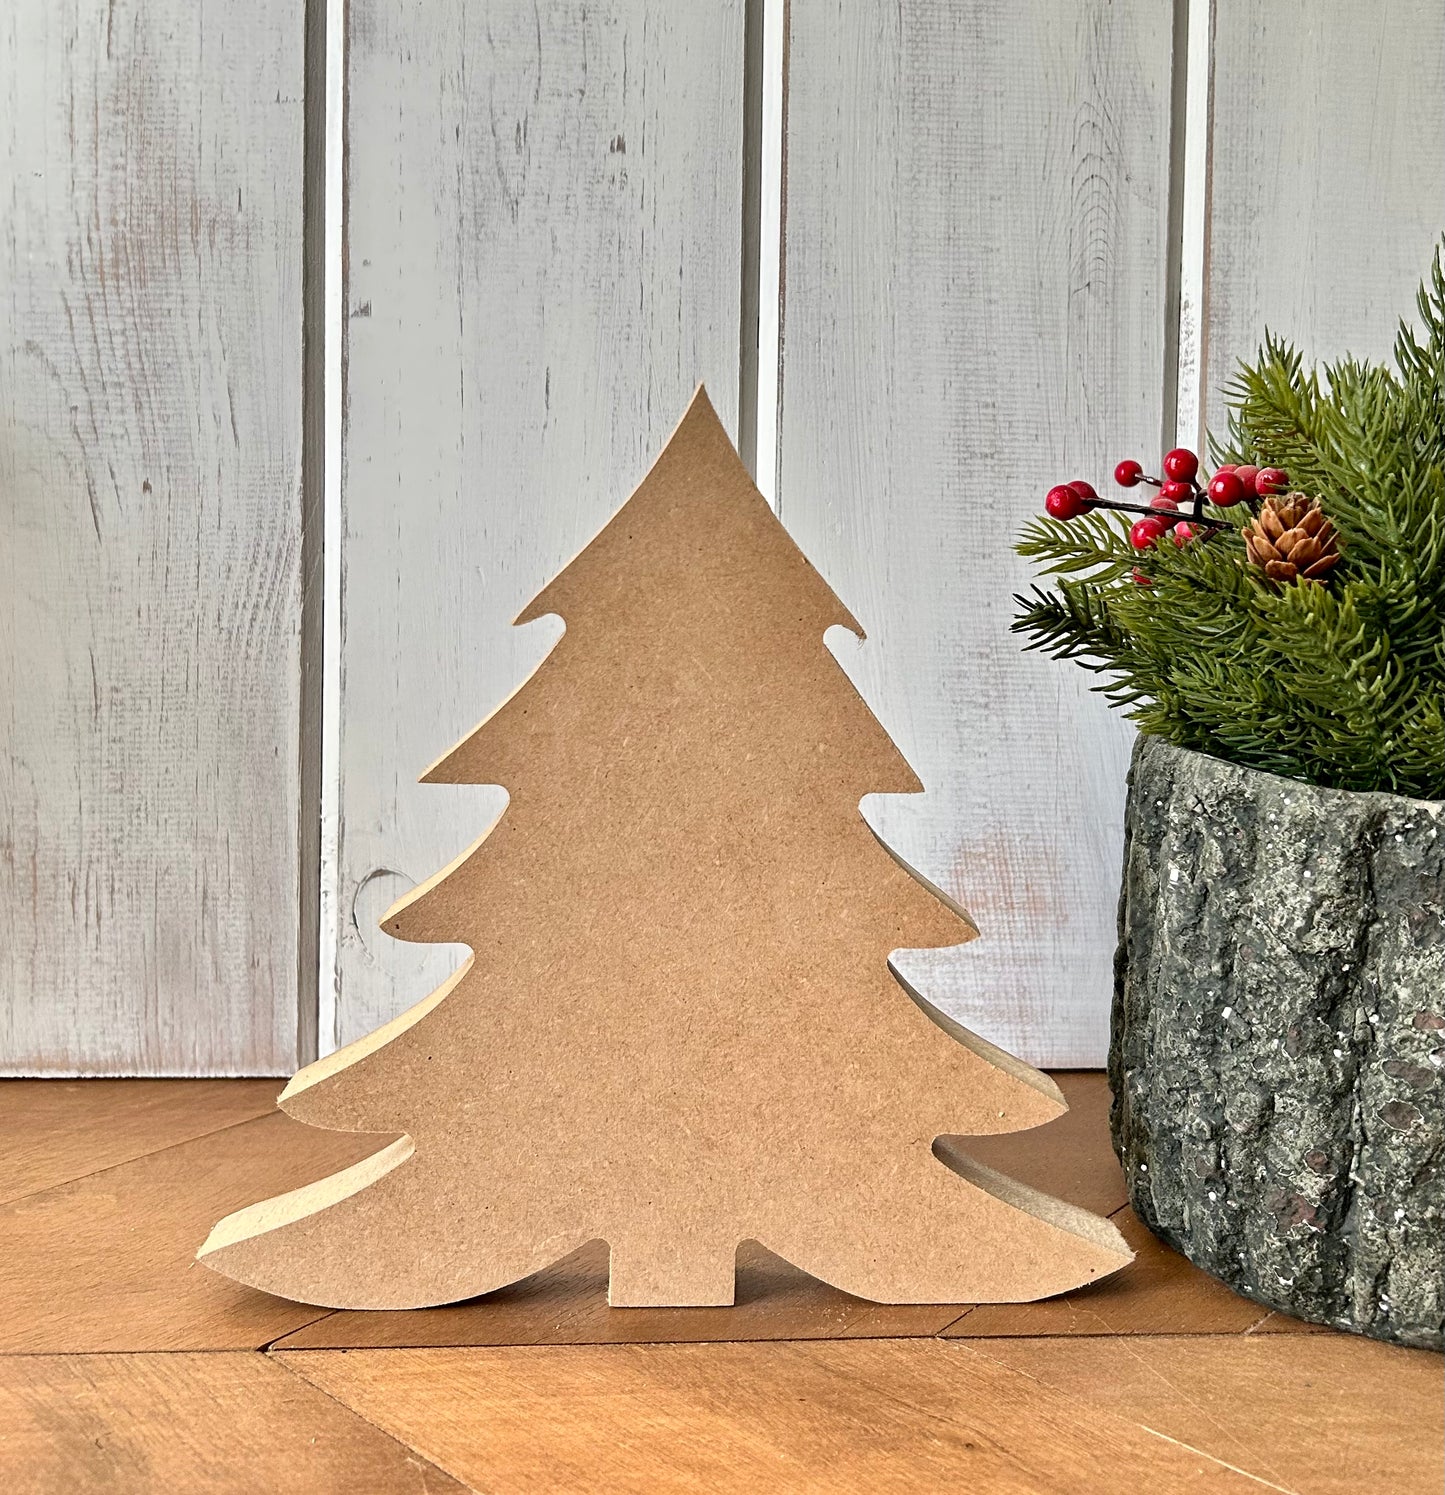 Primitive/Rustic Wood Christmas/Winter Tree - Fluffy Style